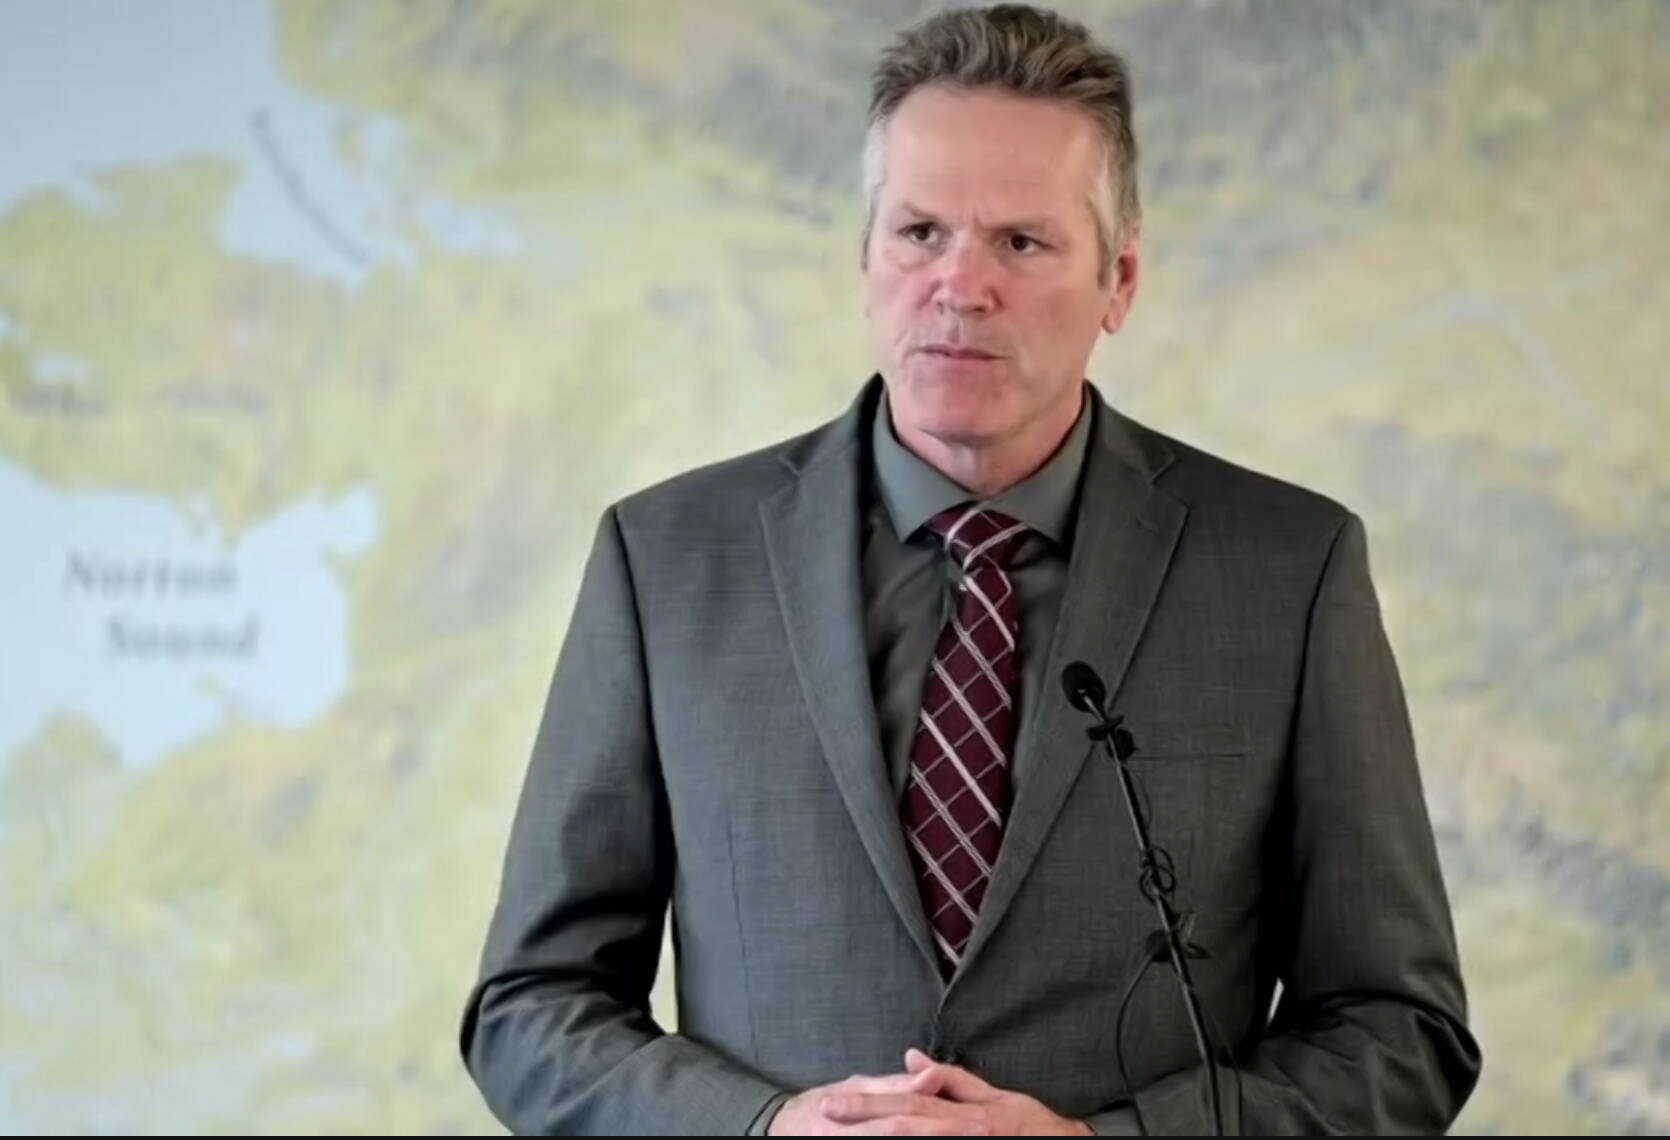 Gov. Mike Dunleavy is seen in a screenshot of a news conference on Monday, Oct. 17, 2022, in Anchorage. (Screenshot)